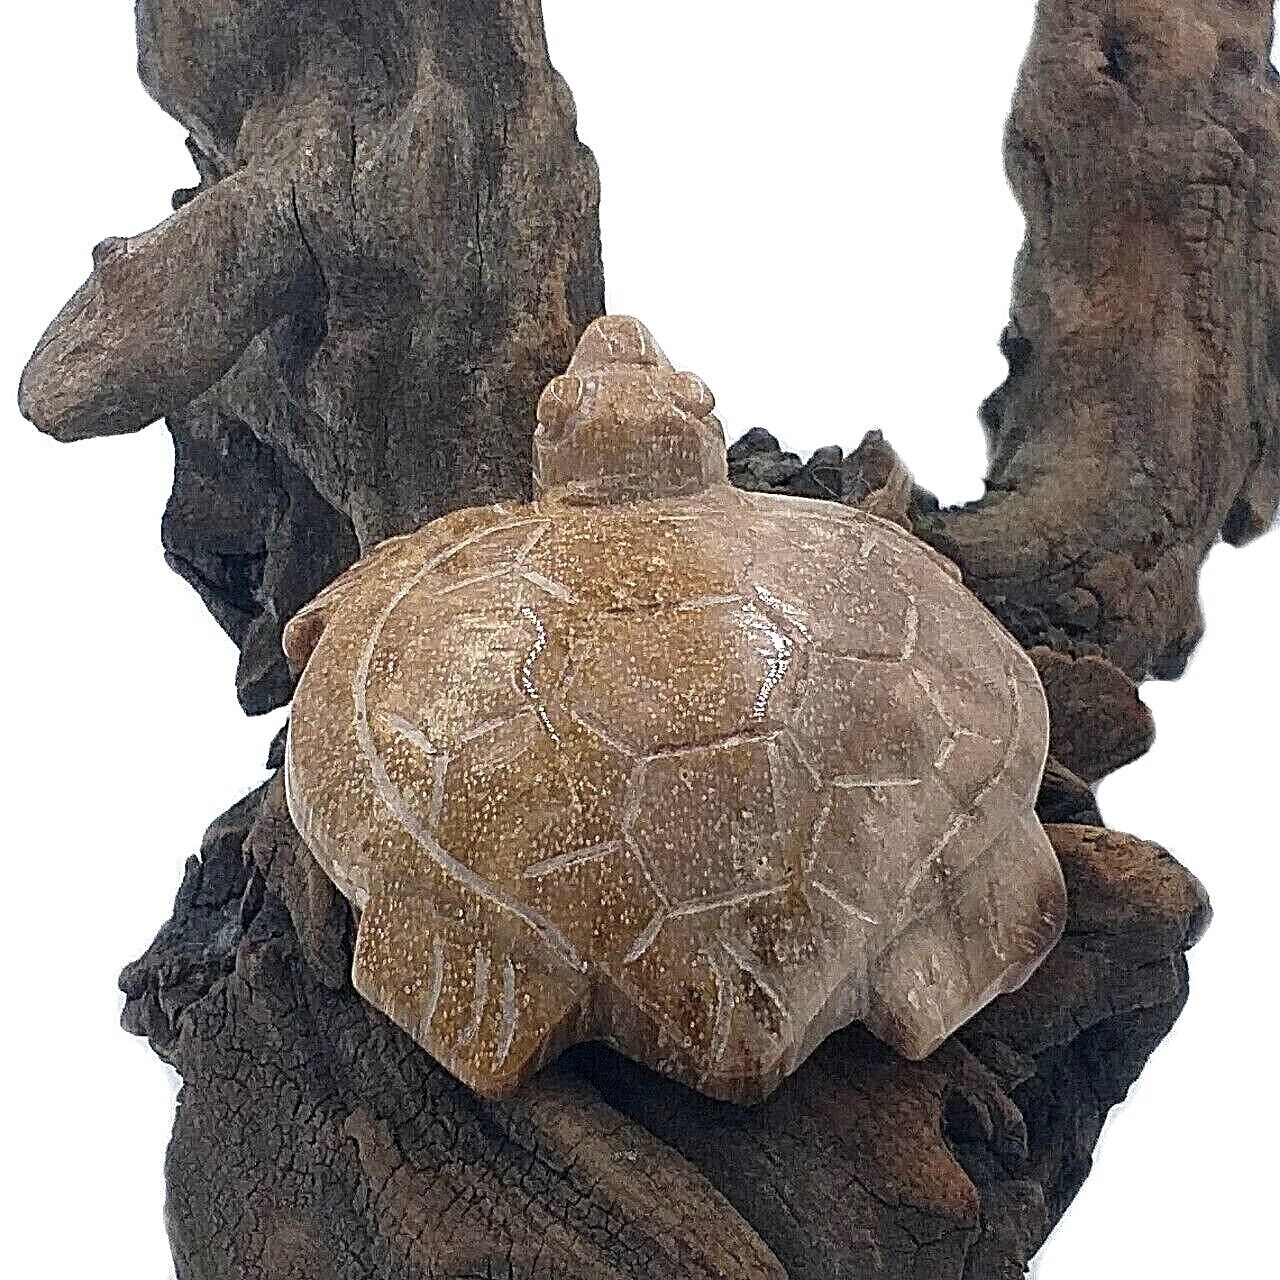 Wood petrified turtle statue stone carving charm heart handmade collect rare 